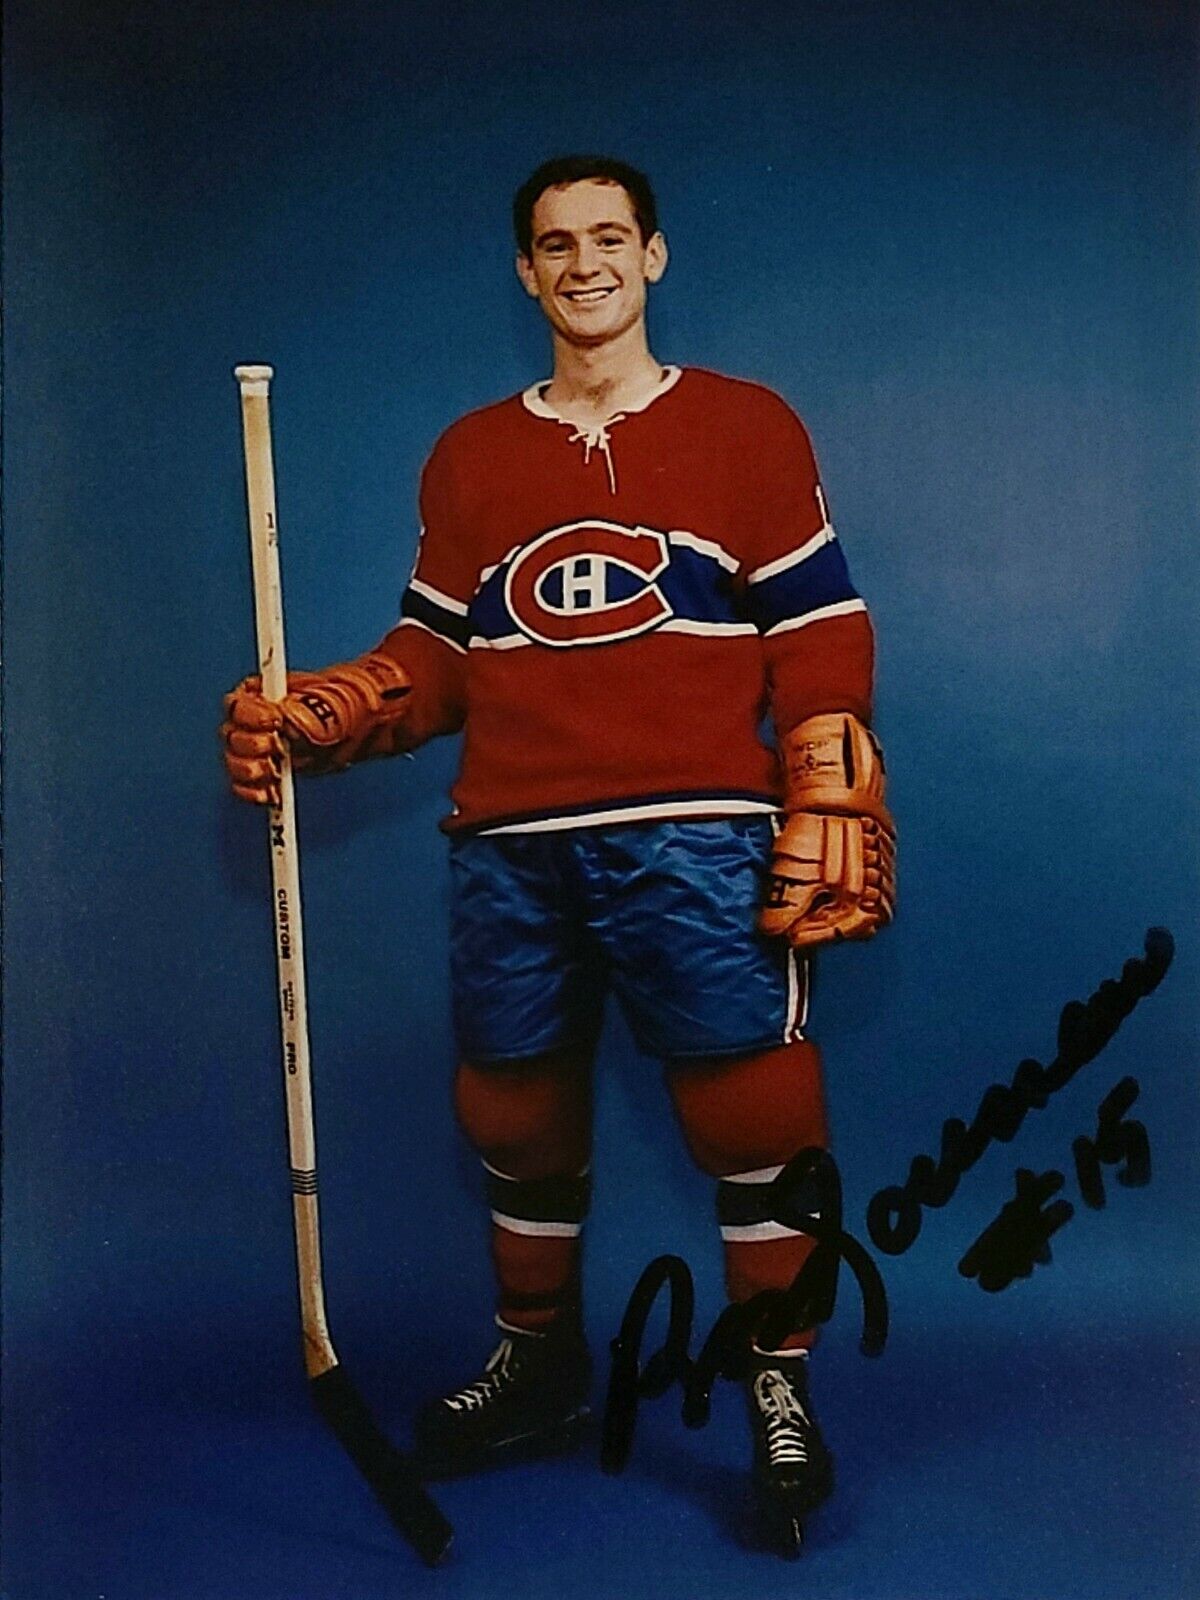 Bobby Rousseau Hand Signed Autograph Photo Poster painting Montreal Canadiens NHL Hockey Player